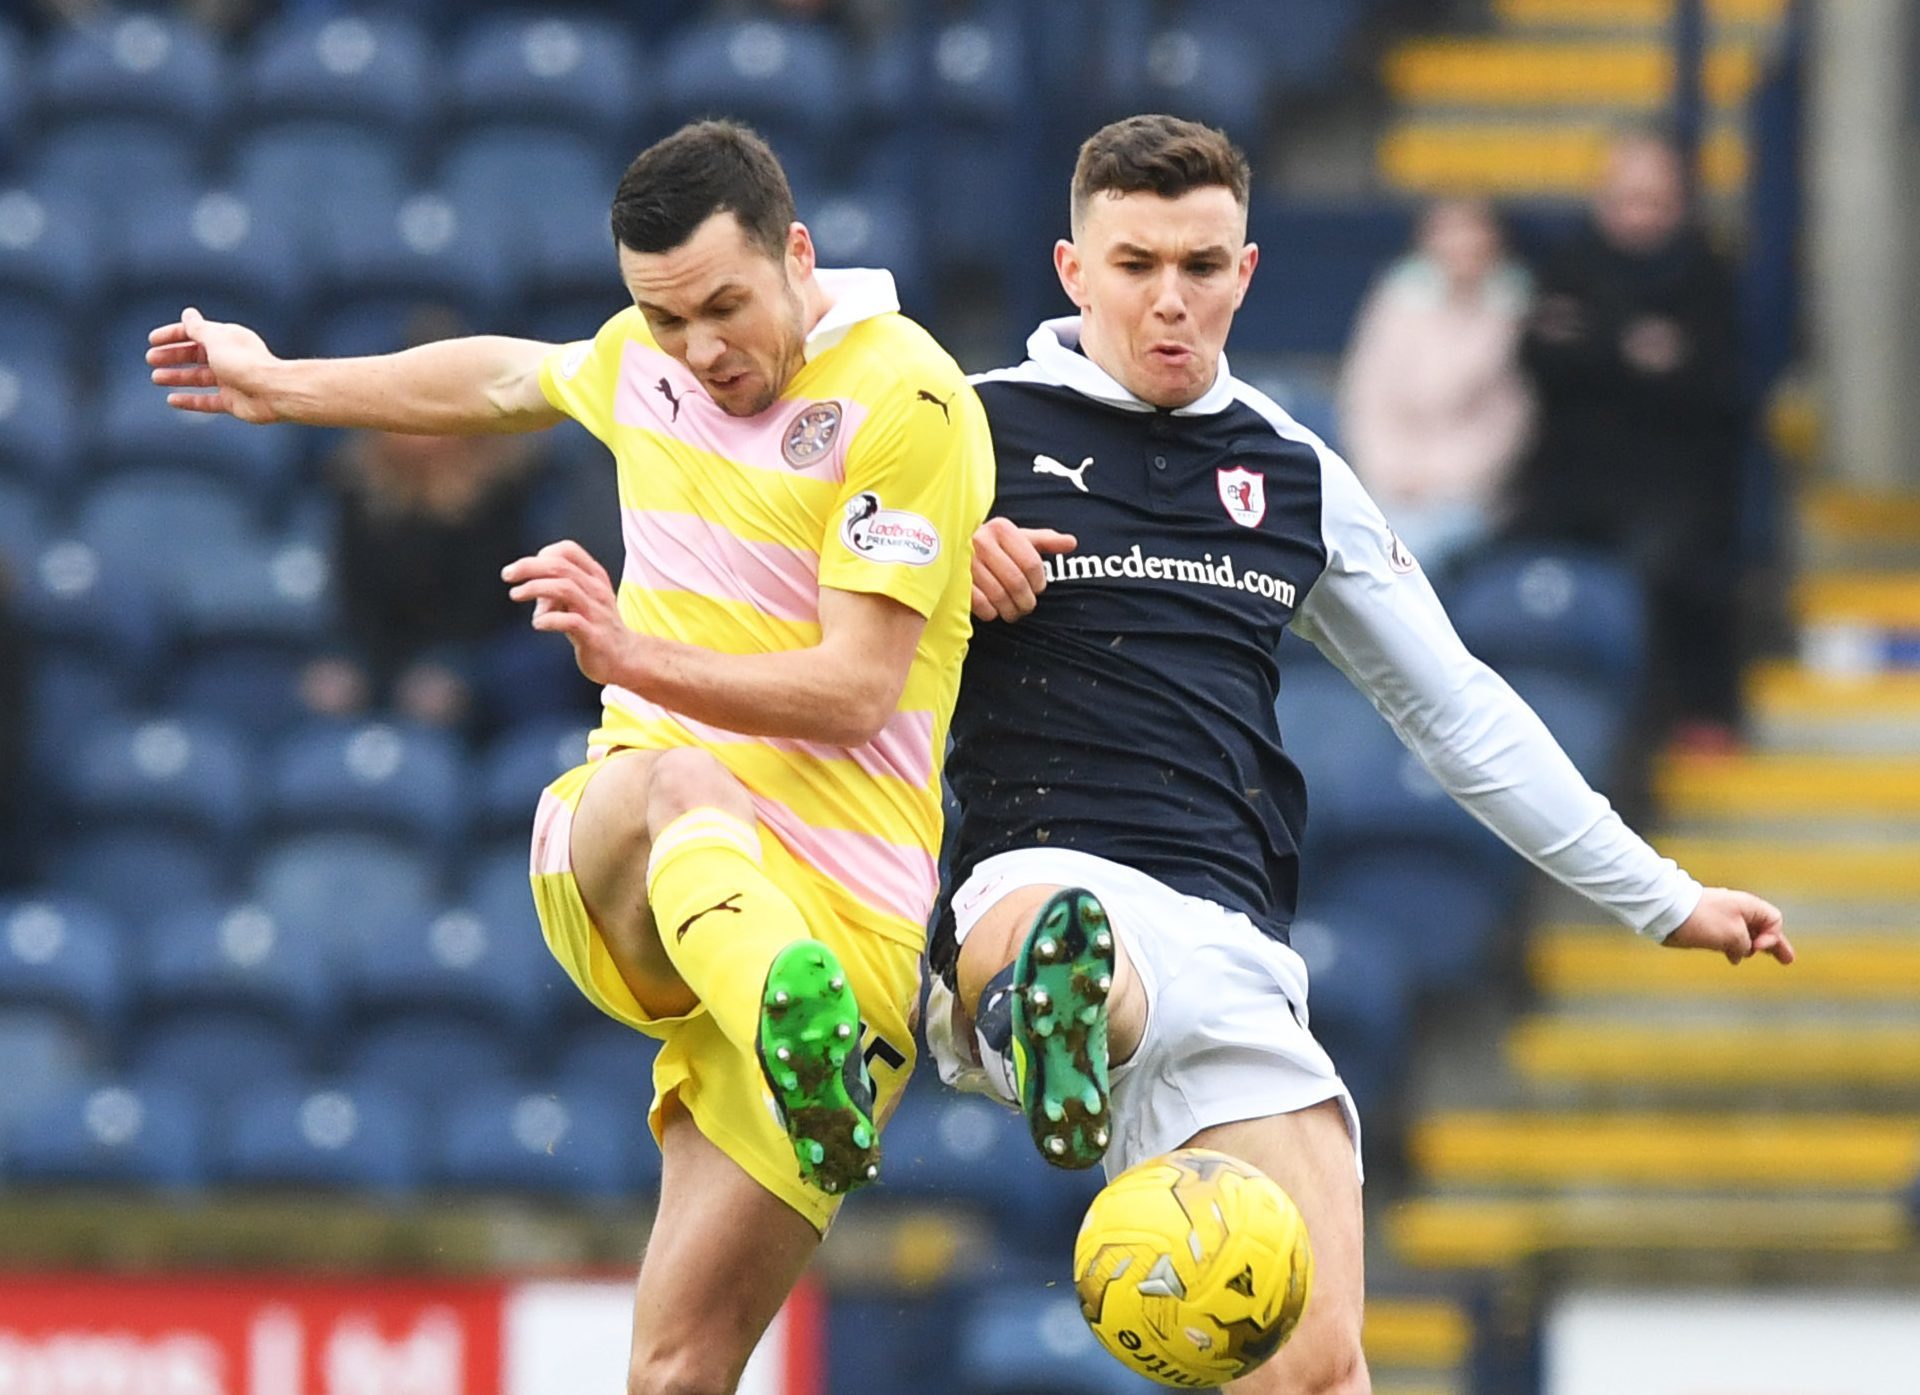 Raith Rovers' Ross Matthews looking to finish off a good week - The Courier